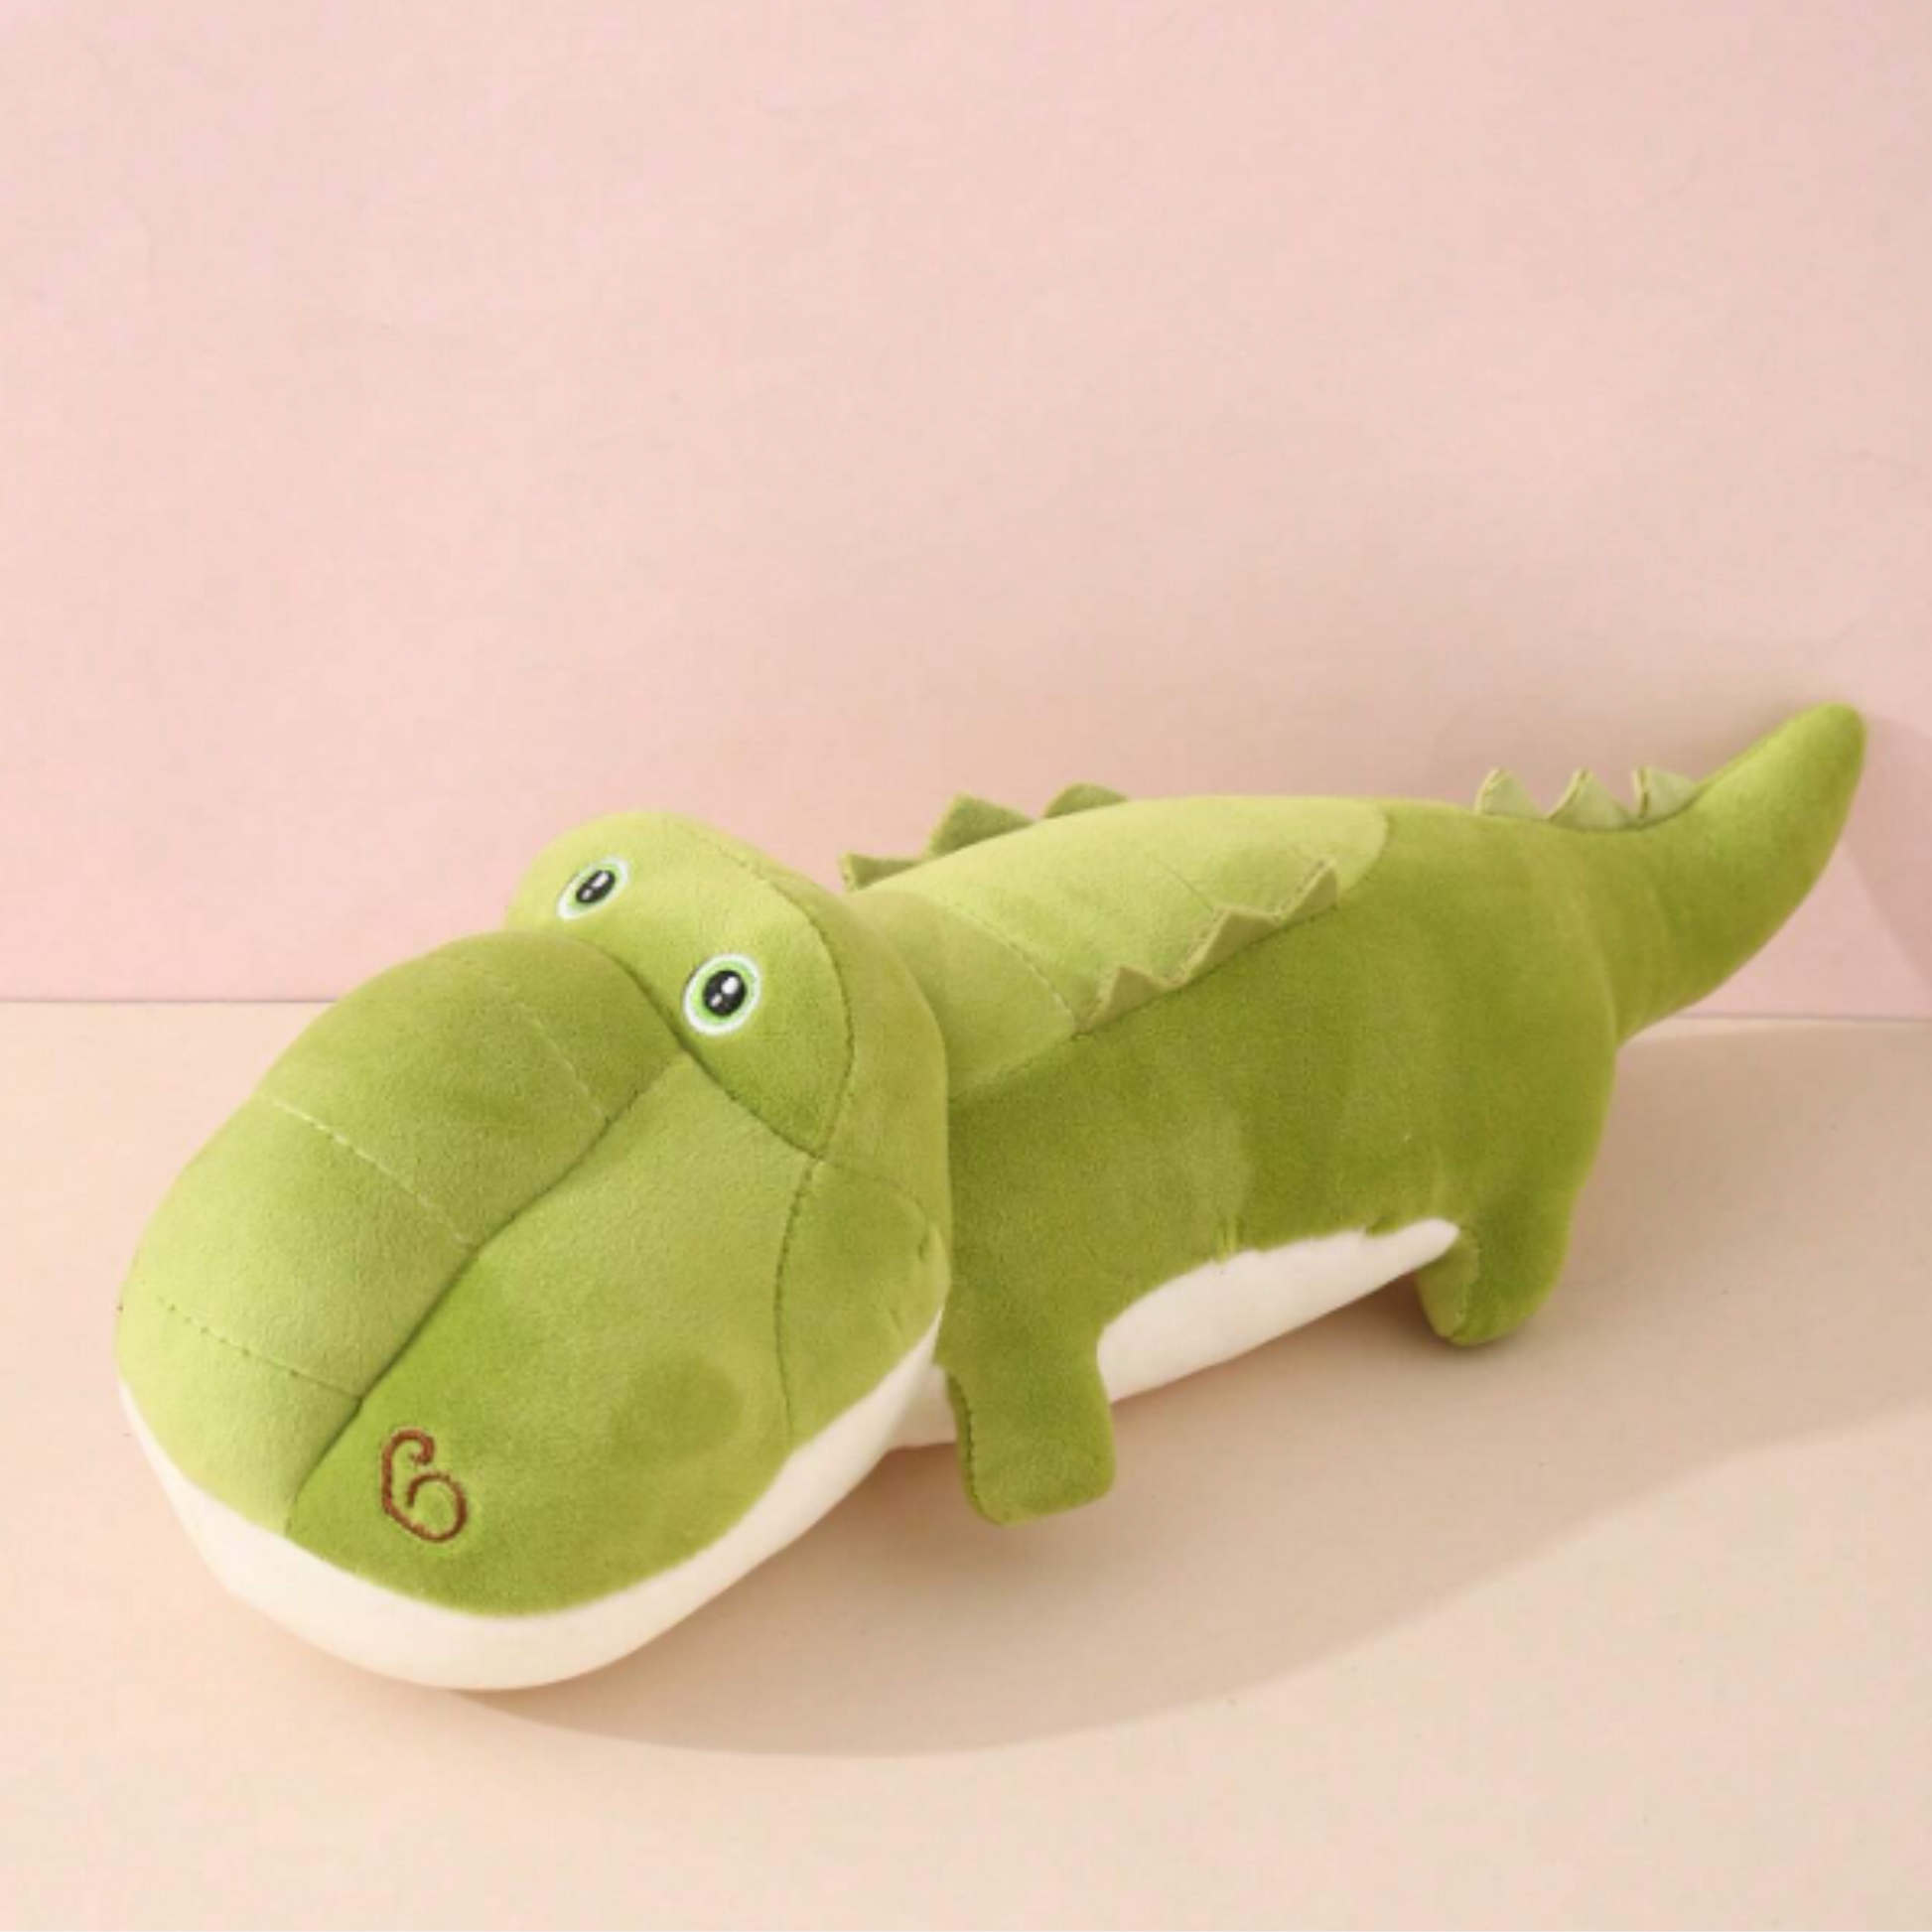 A stuffed crocodile toy sitting on a table. The crocodile is green and has a long tail. It is made of soft plush material and has a closed mouth.